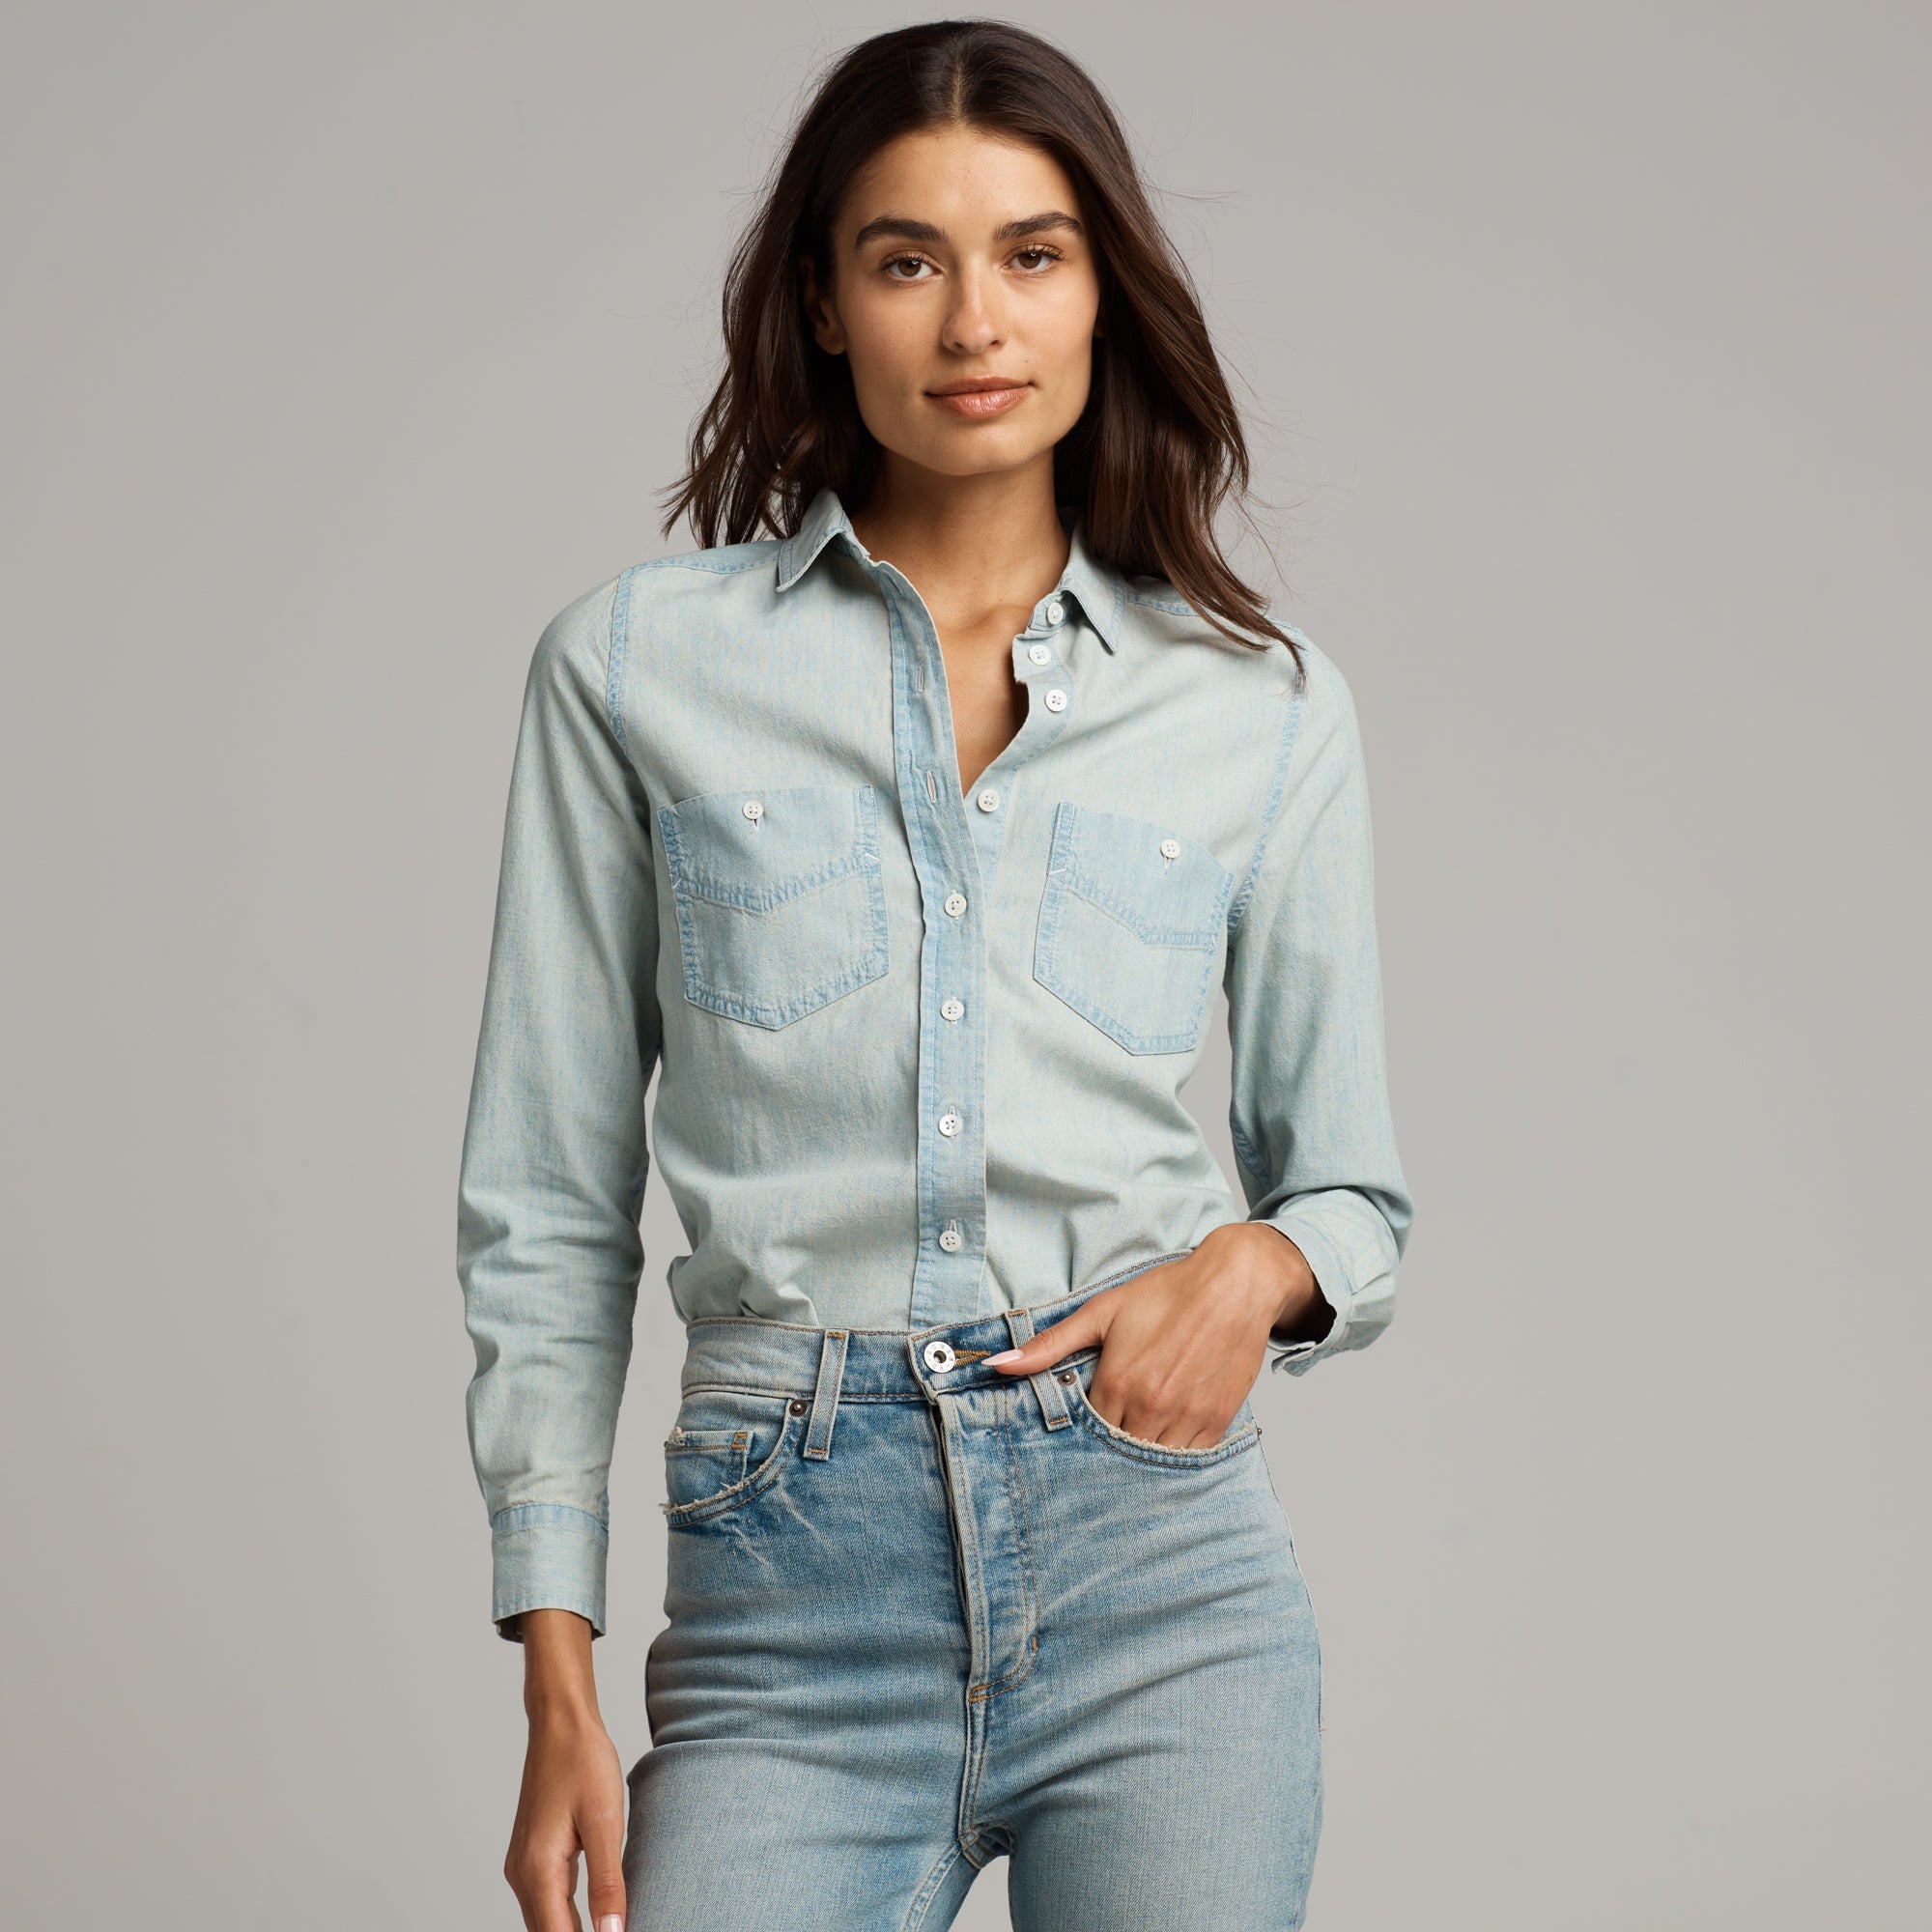 How to Wear a Chambray Shirt - Take It From Nicole